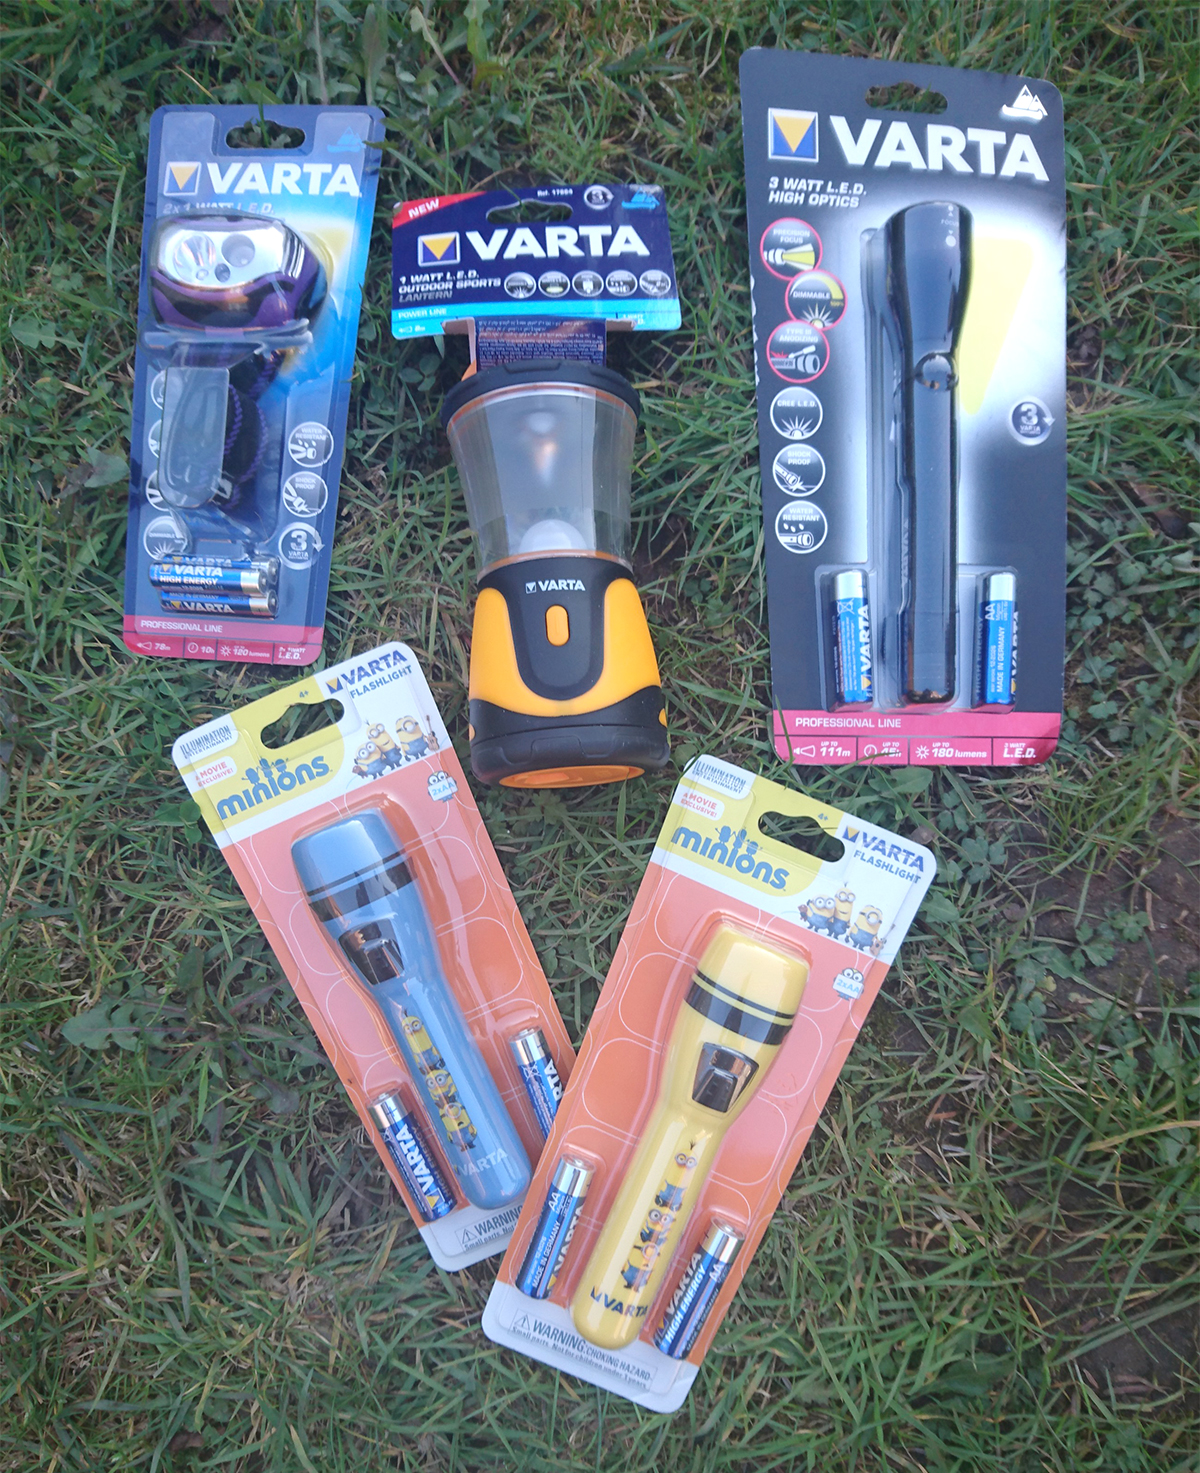 varta-torch-camping-competition